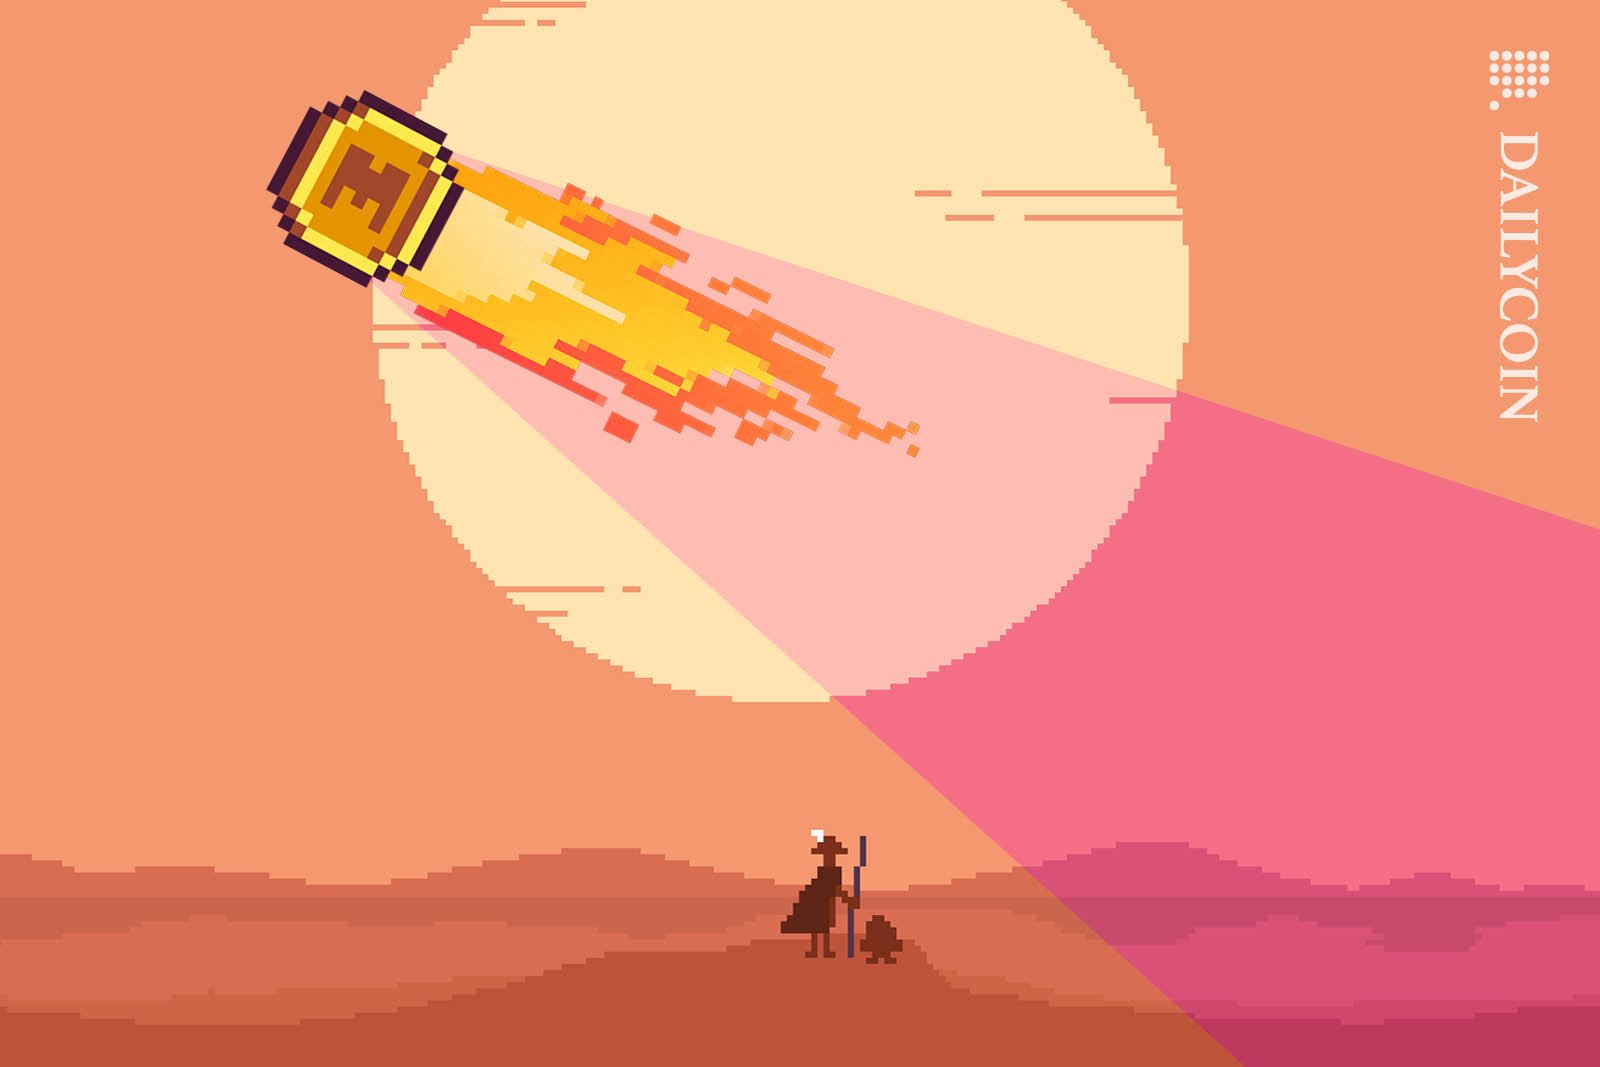 A Memecoin flying accross the sky watched by a shephard and his dog in pixelart style.